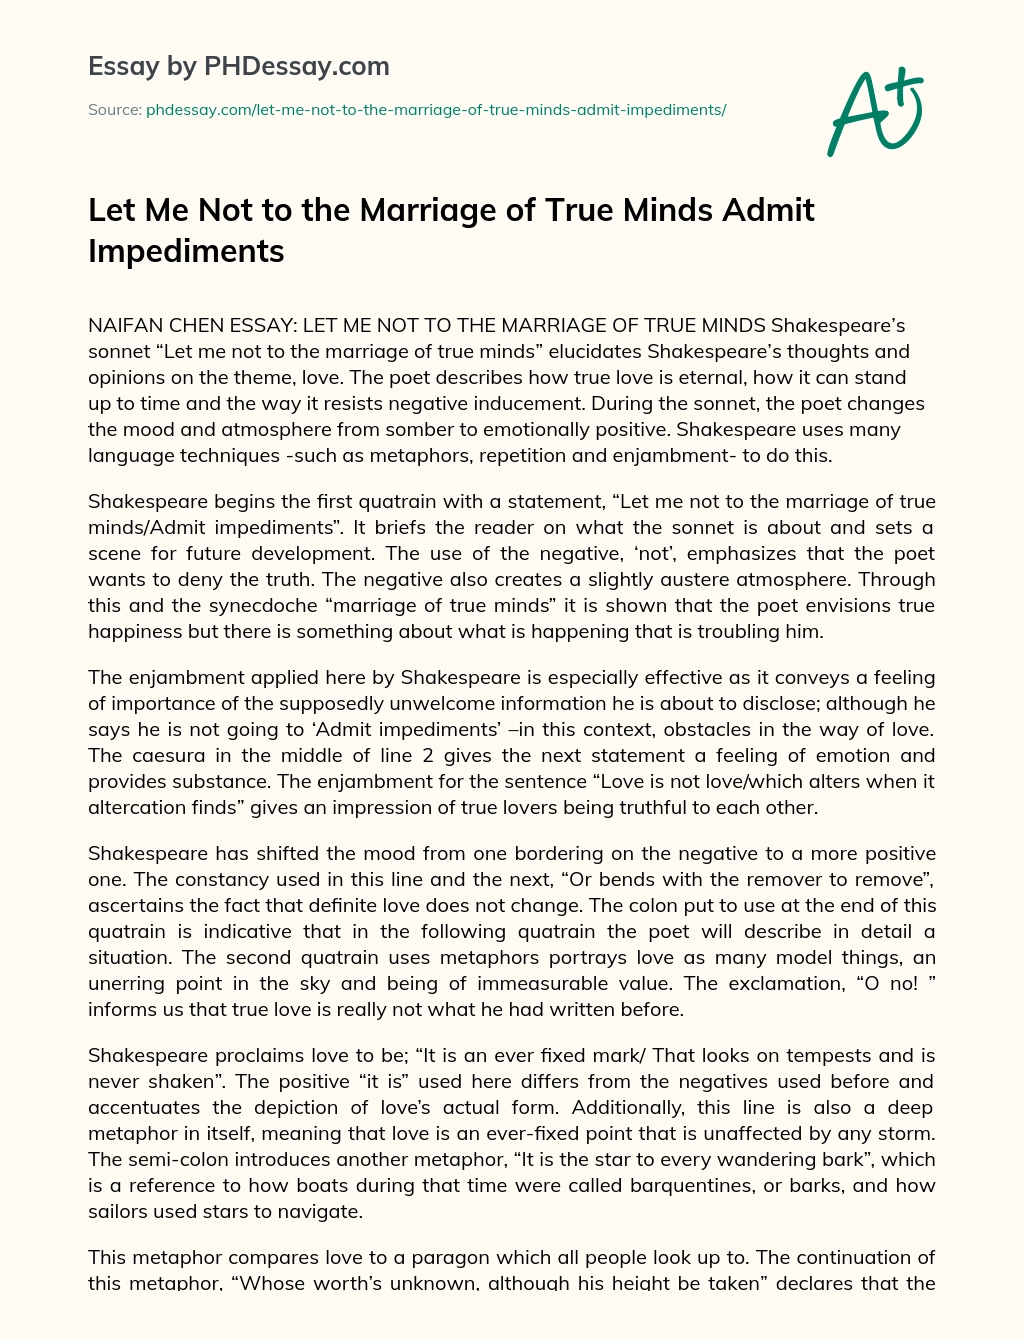 Let Me Not to the Marriage of True Minds Admit Impediments essay